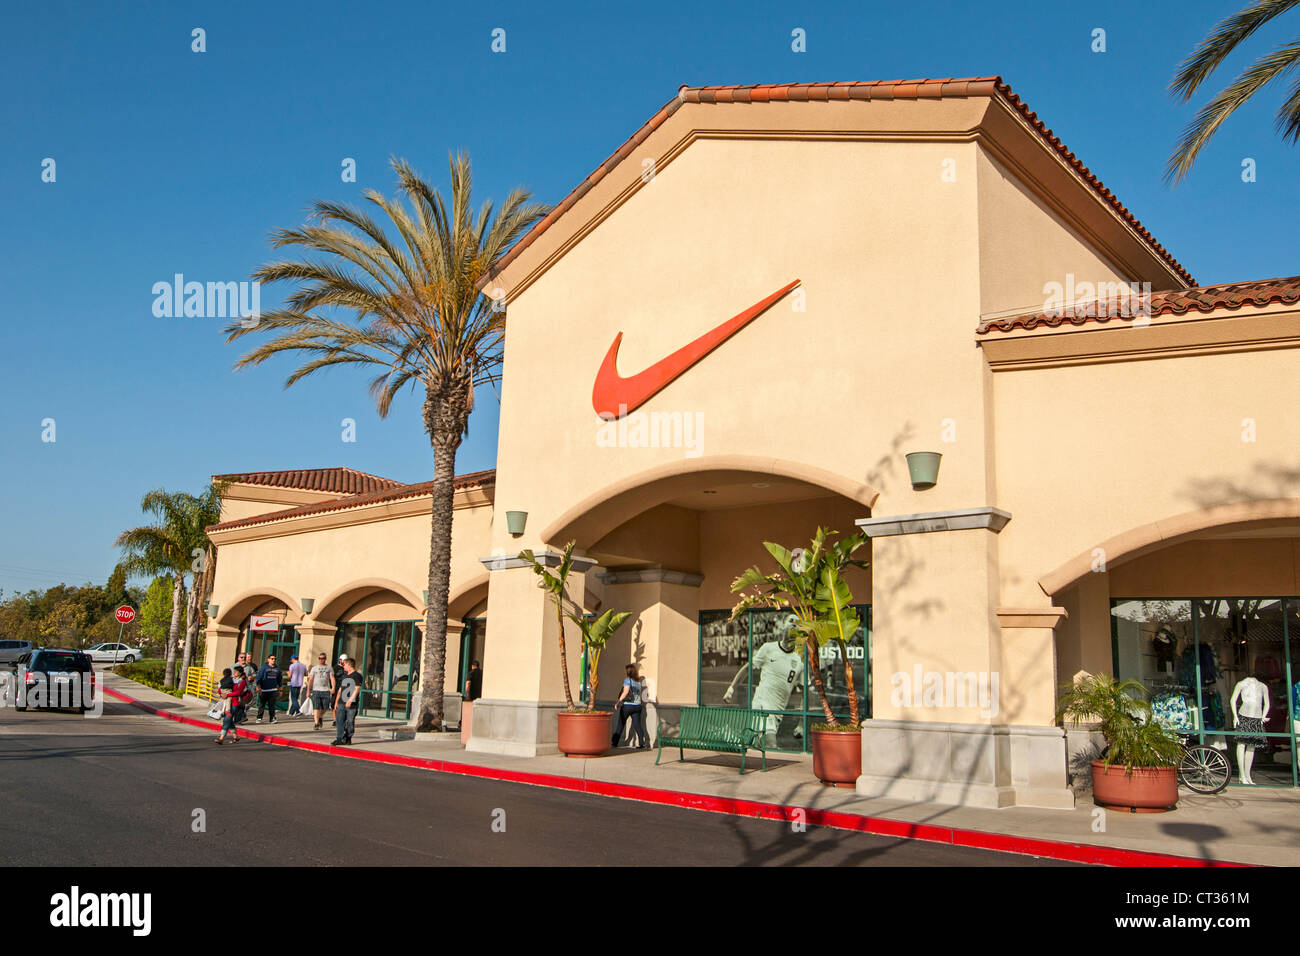 camraillo outlet nike store